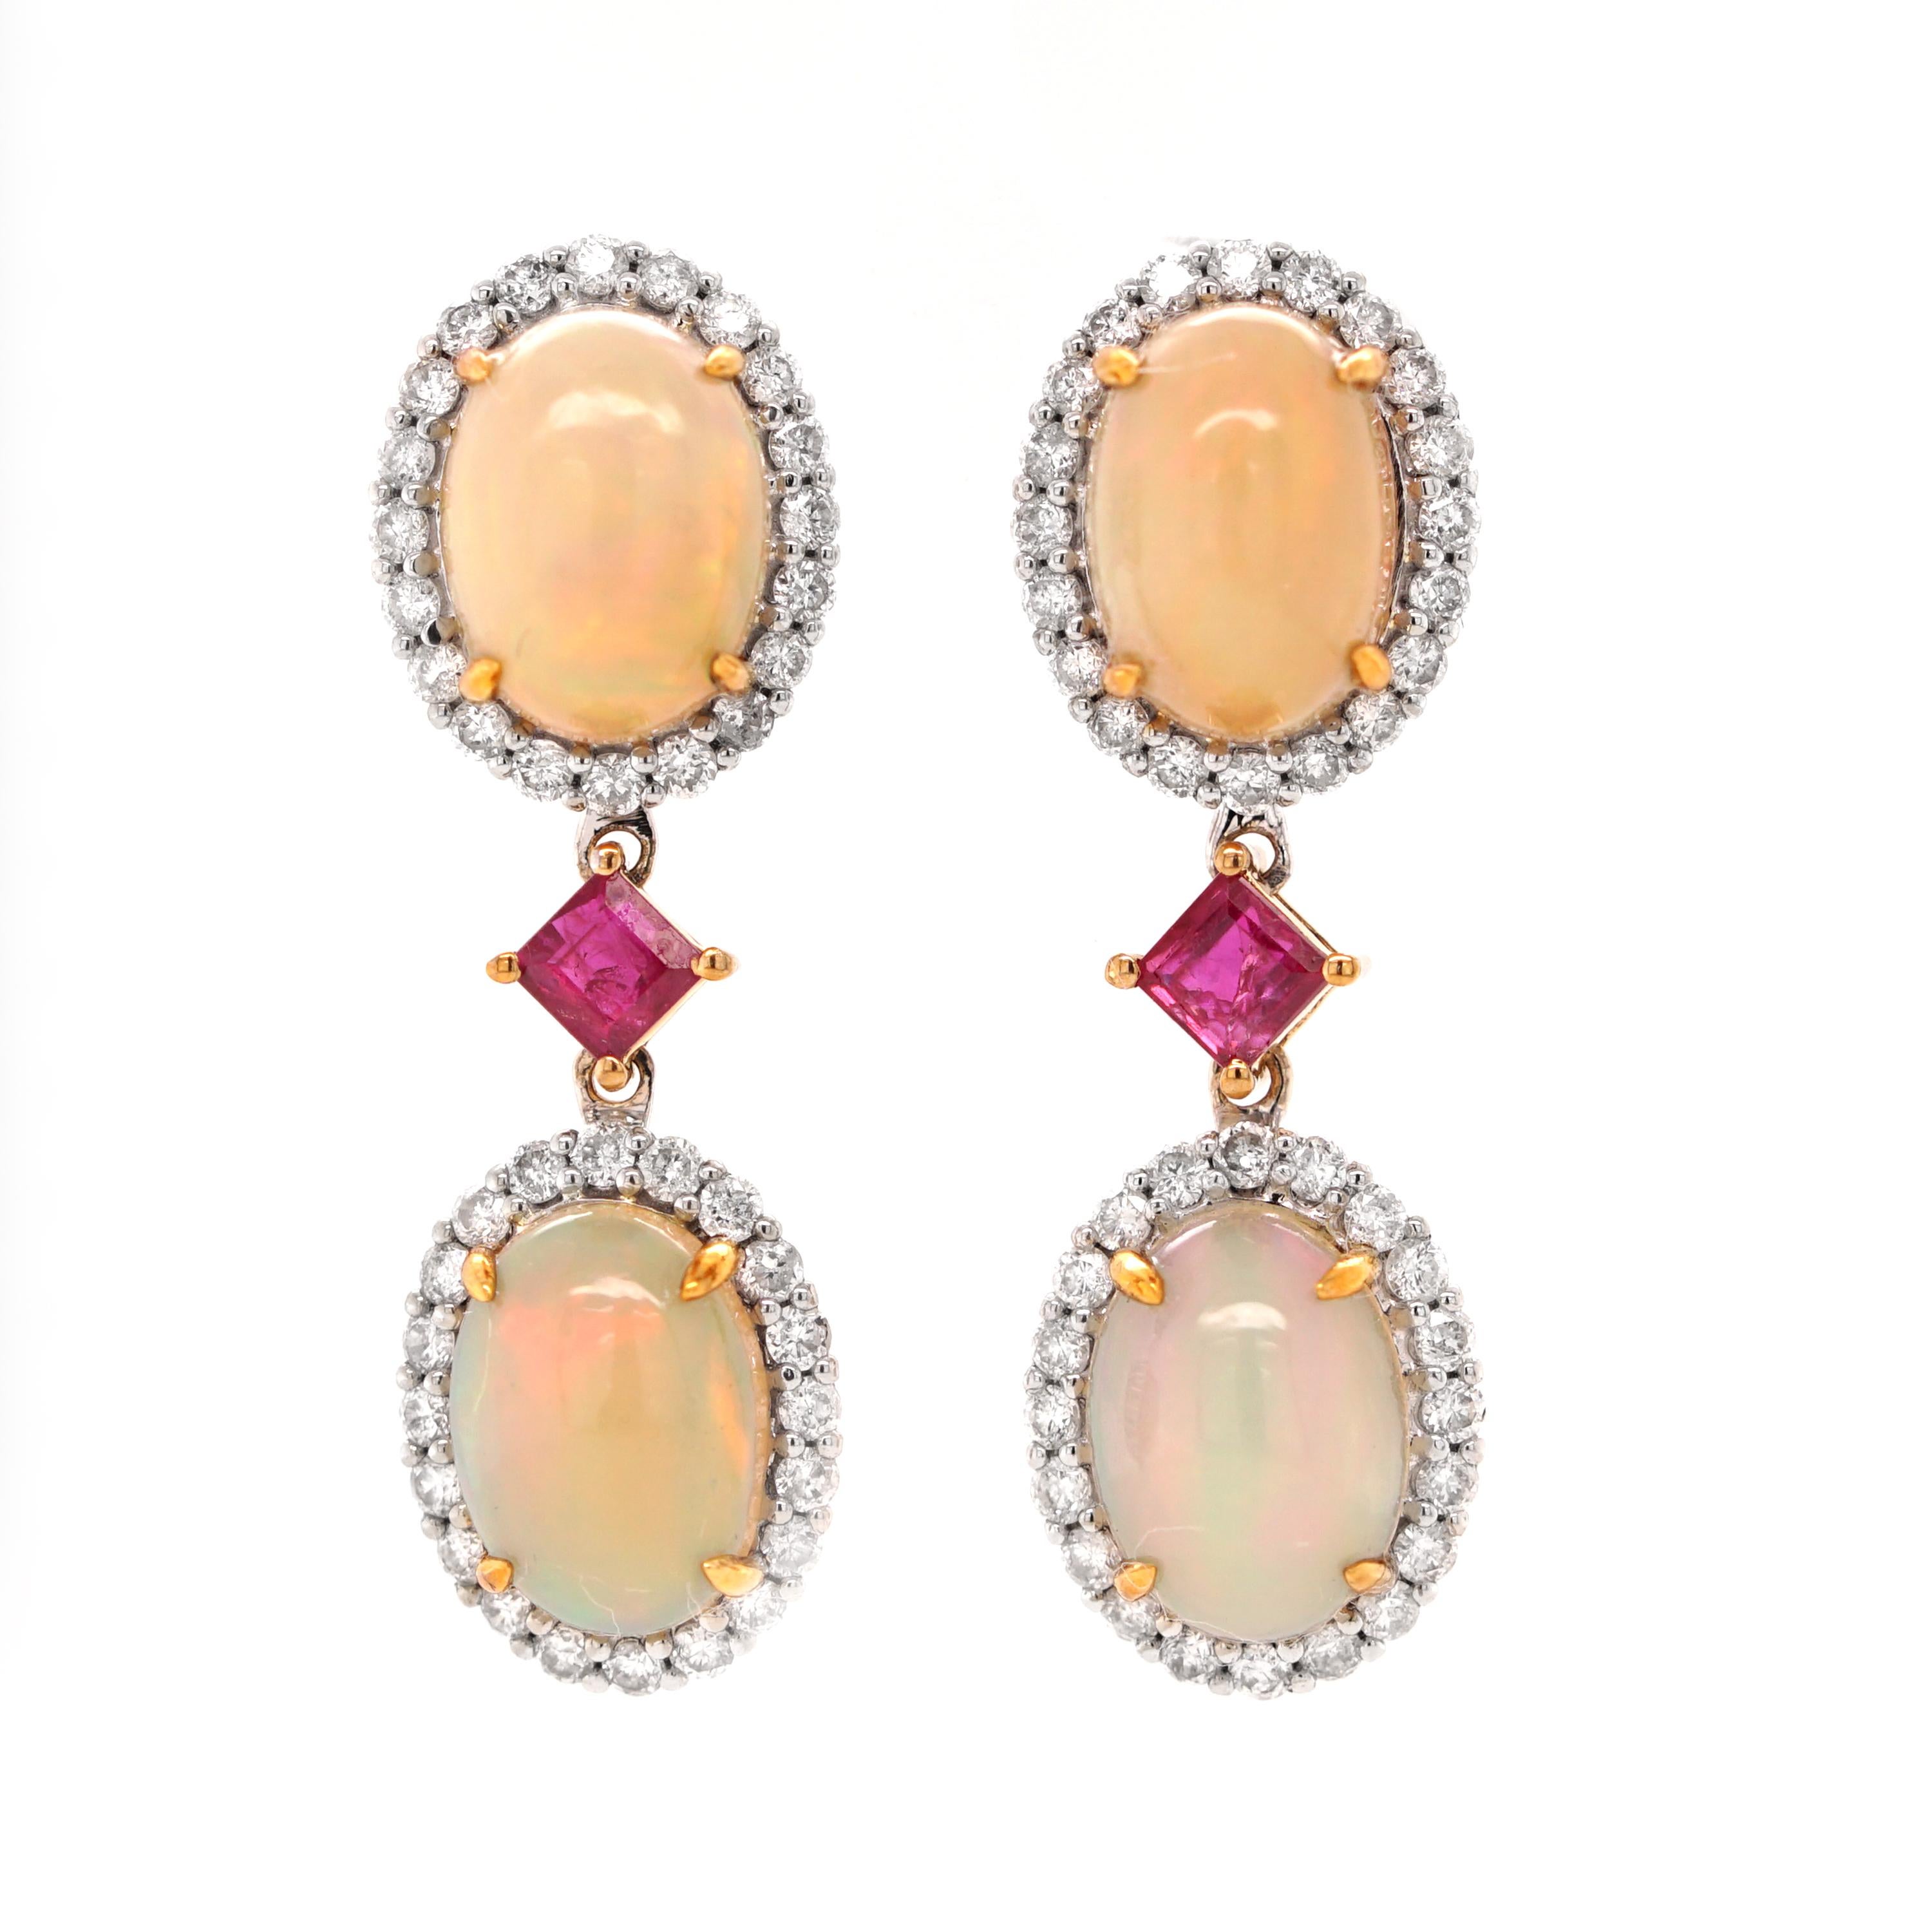 Description:
Opalescent earrings in 18ct white gold and accents of yellow gold. Featuring 3.58ct opals decorated with 0.56ct diamonds and 3ct rubies.

- Dimensions (HxW): 27 x 9mm
- Weight: 2.2gm
- Fitting: post and butterfly

About Fei Liu Fine